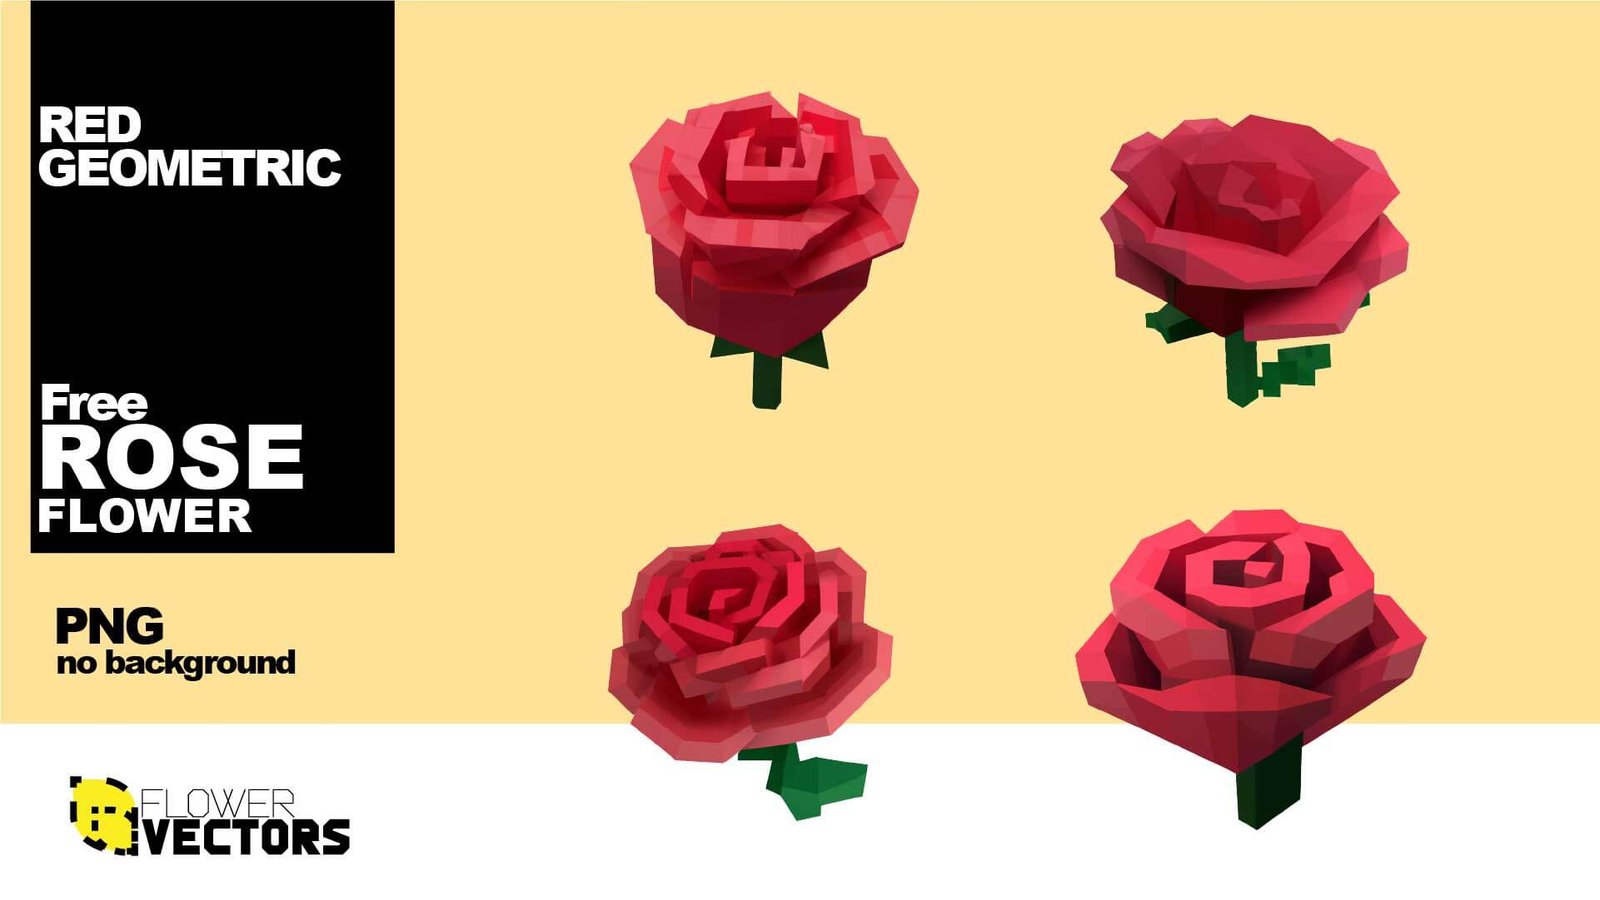 Geometric rose images in PNG transparent no background pink, red colors